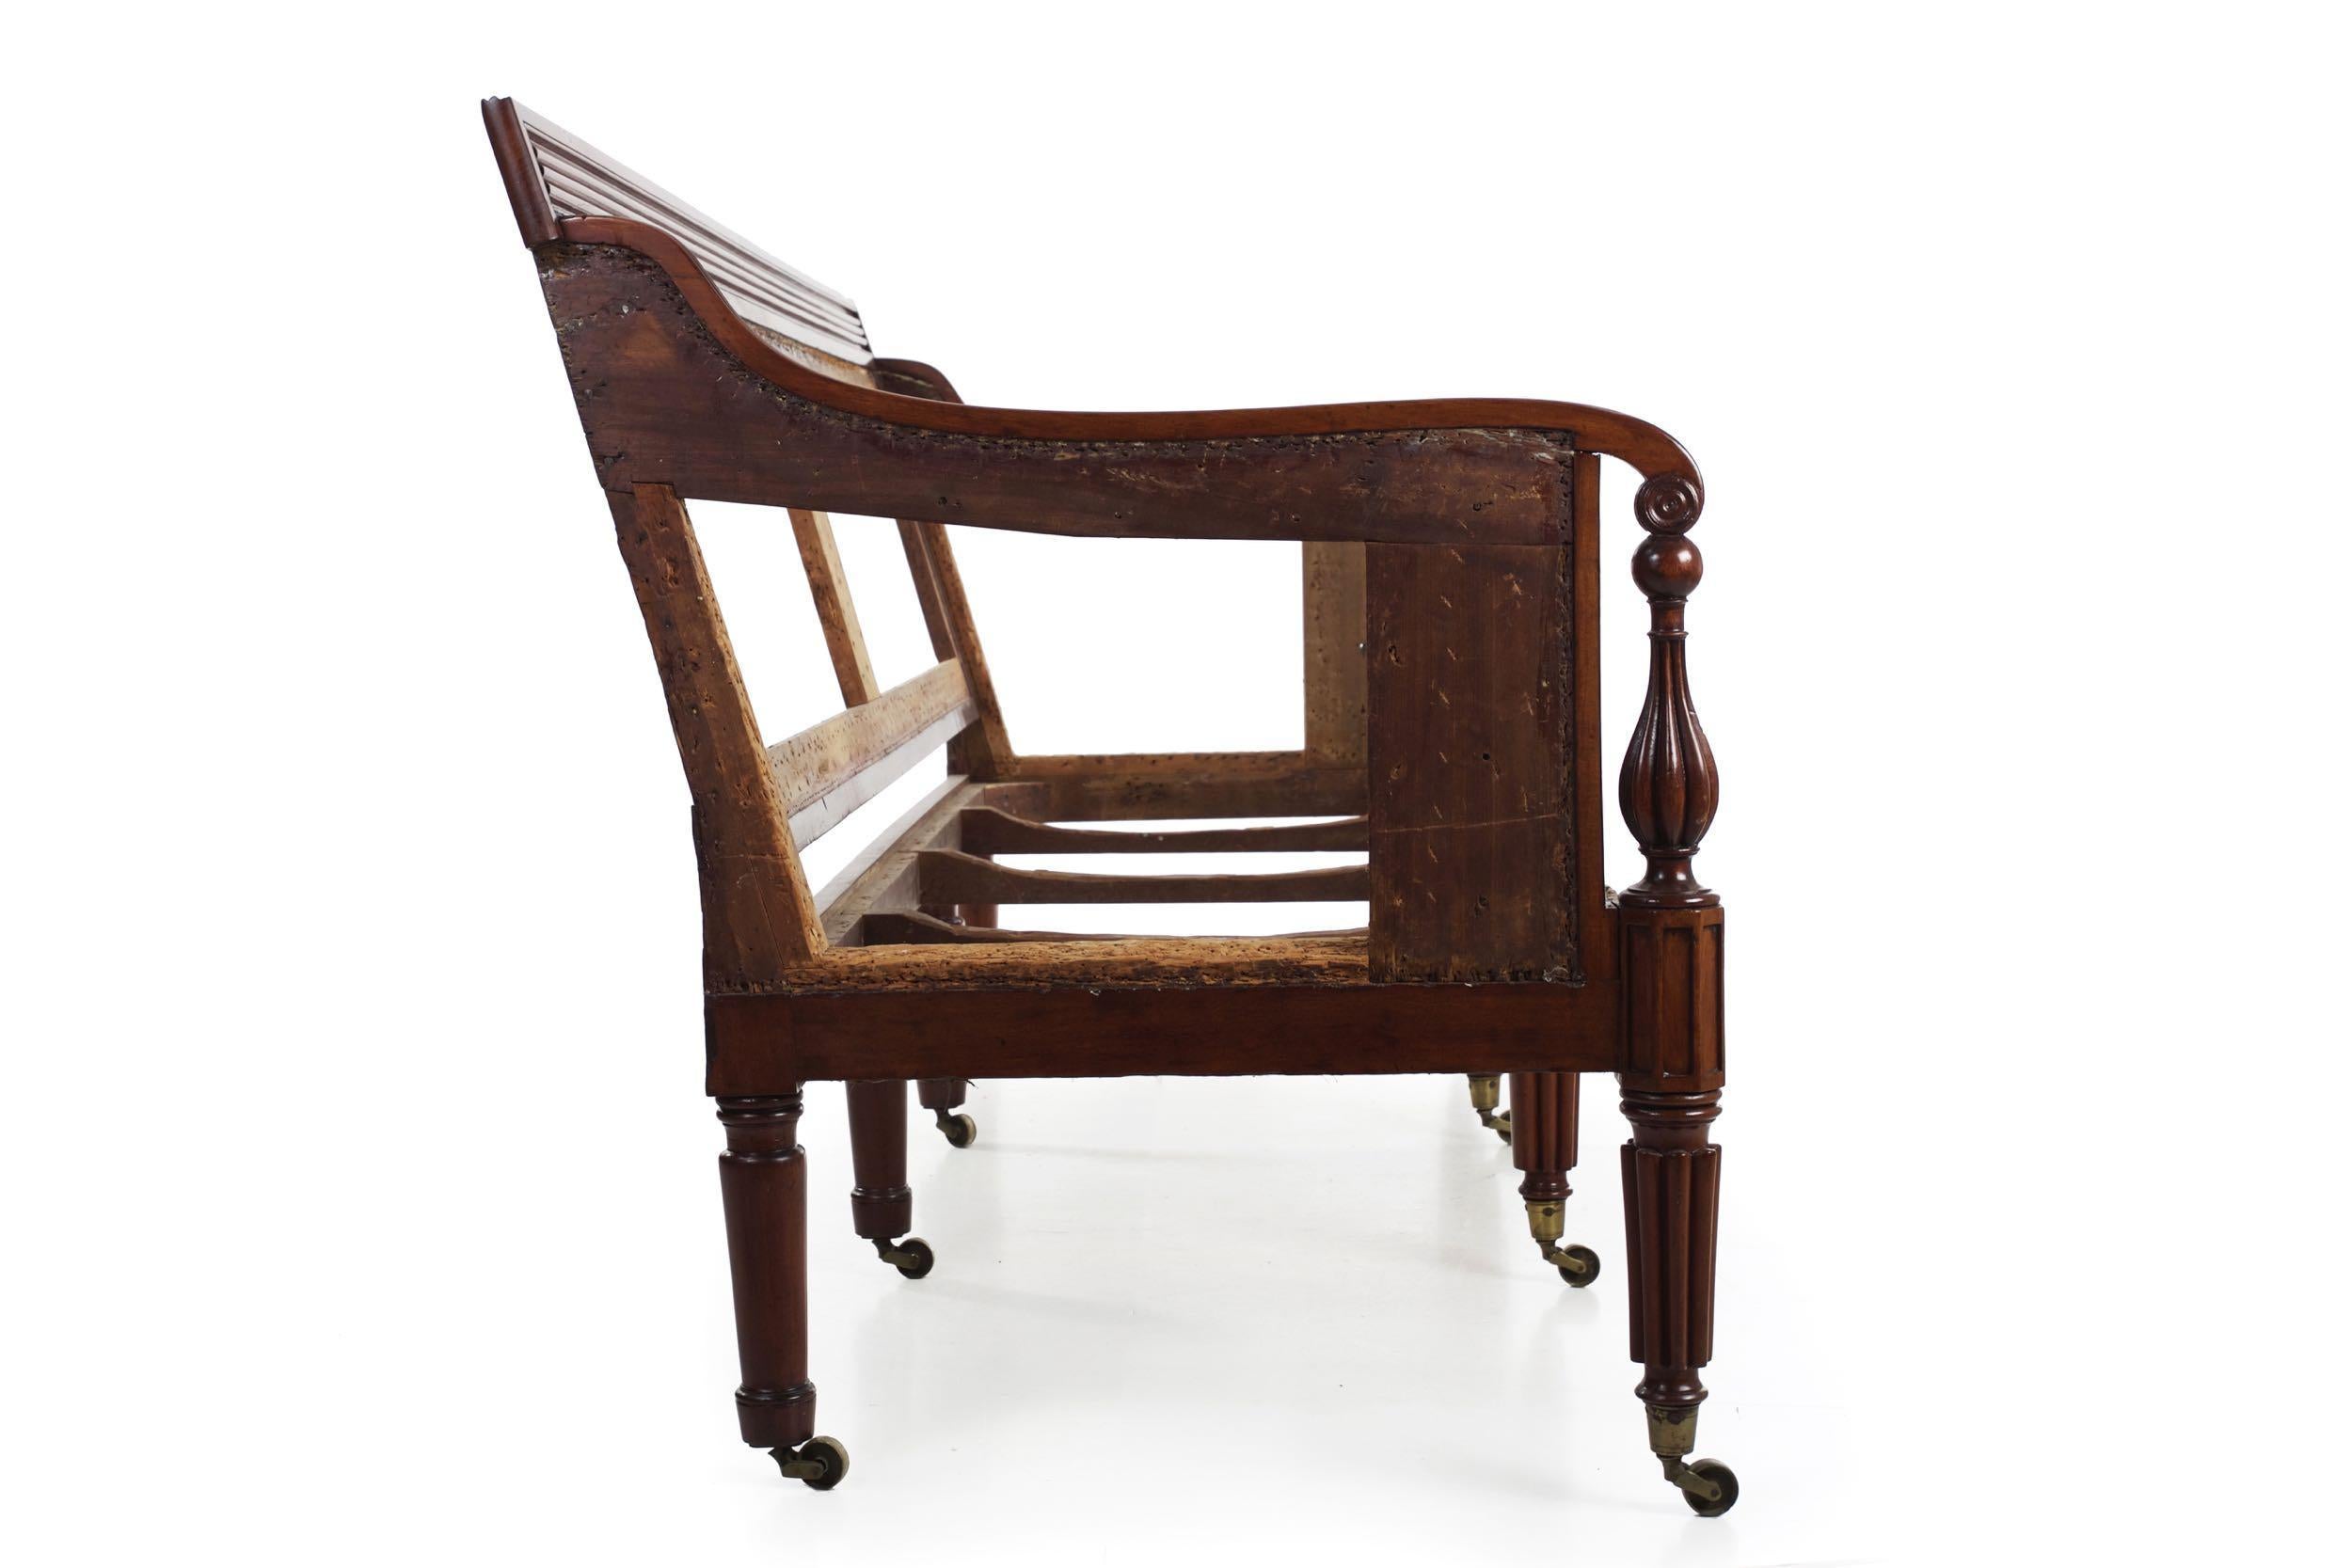 American Federal Carved Mahogany Sofa Attributed to William Camp, Baltimore 1